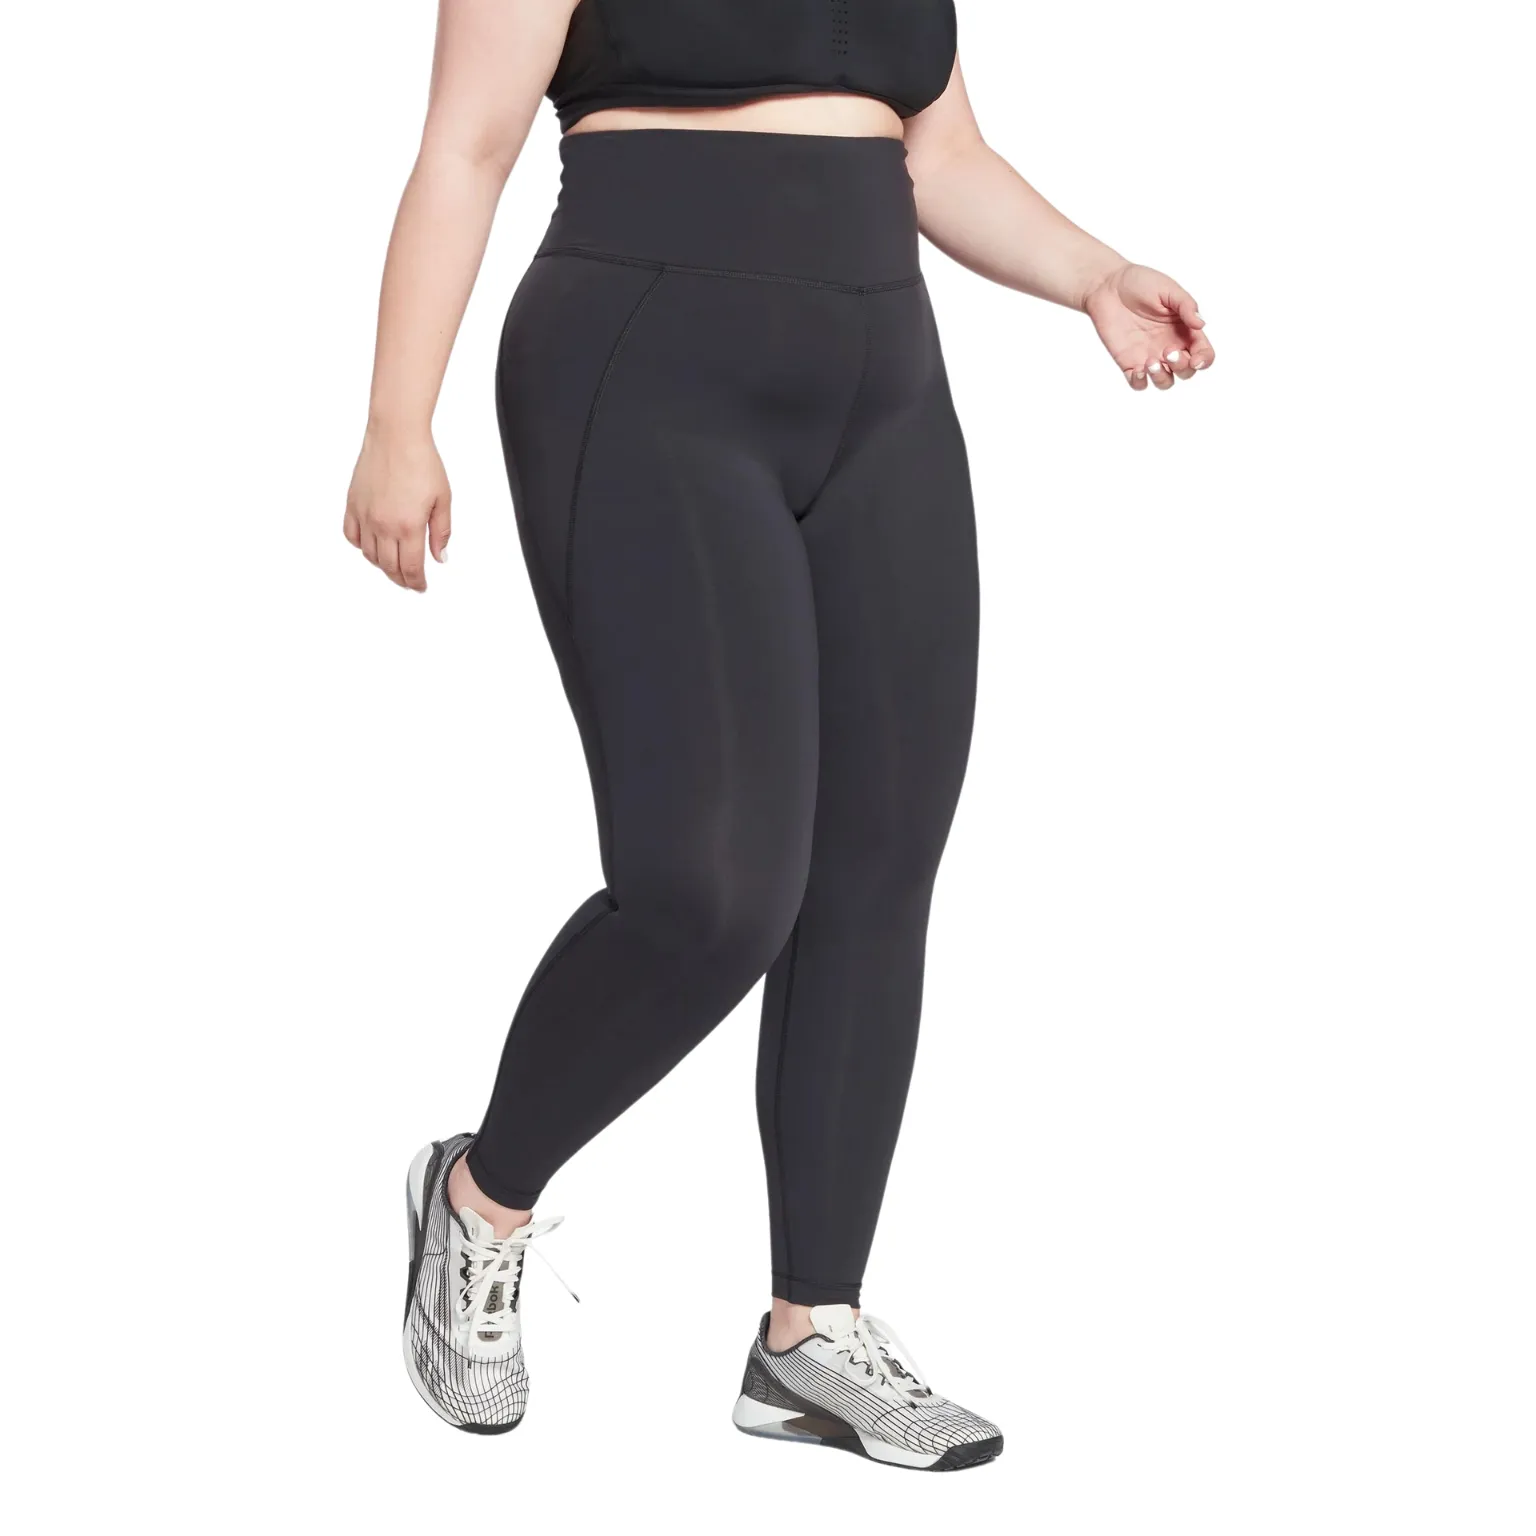 Plus Size High Waisted Leggings manufacturing with trendy design